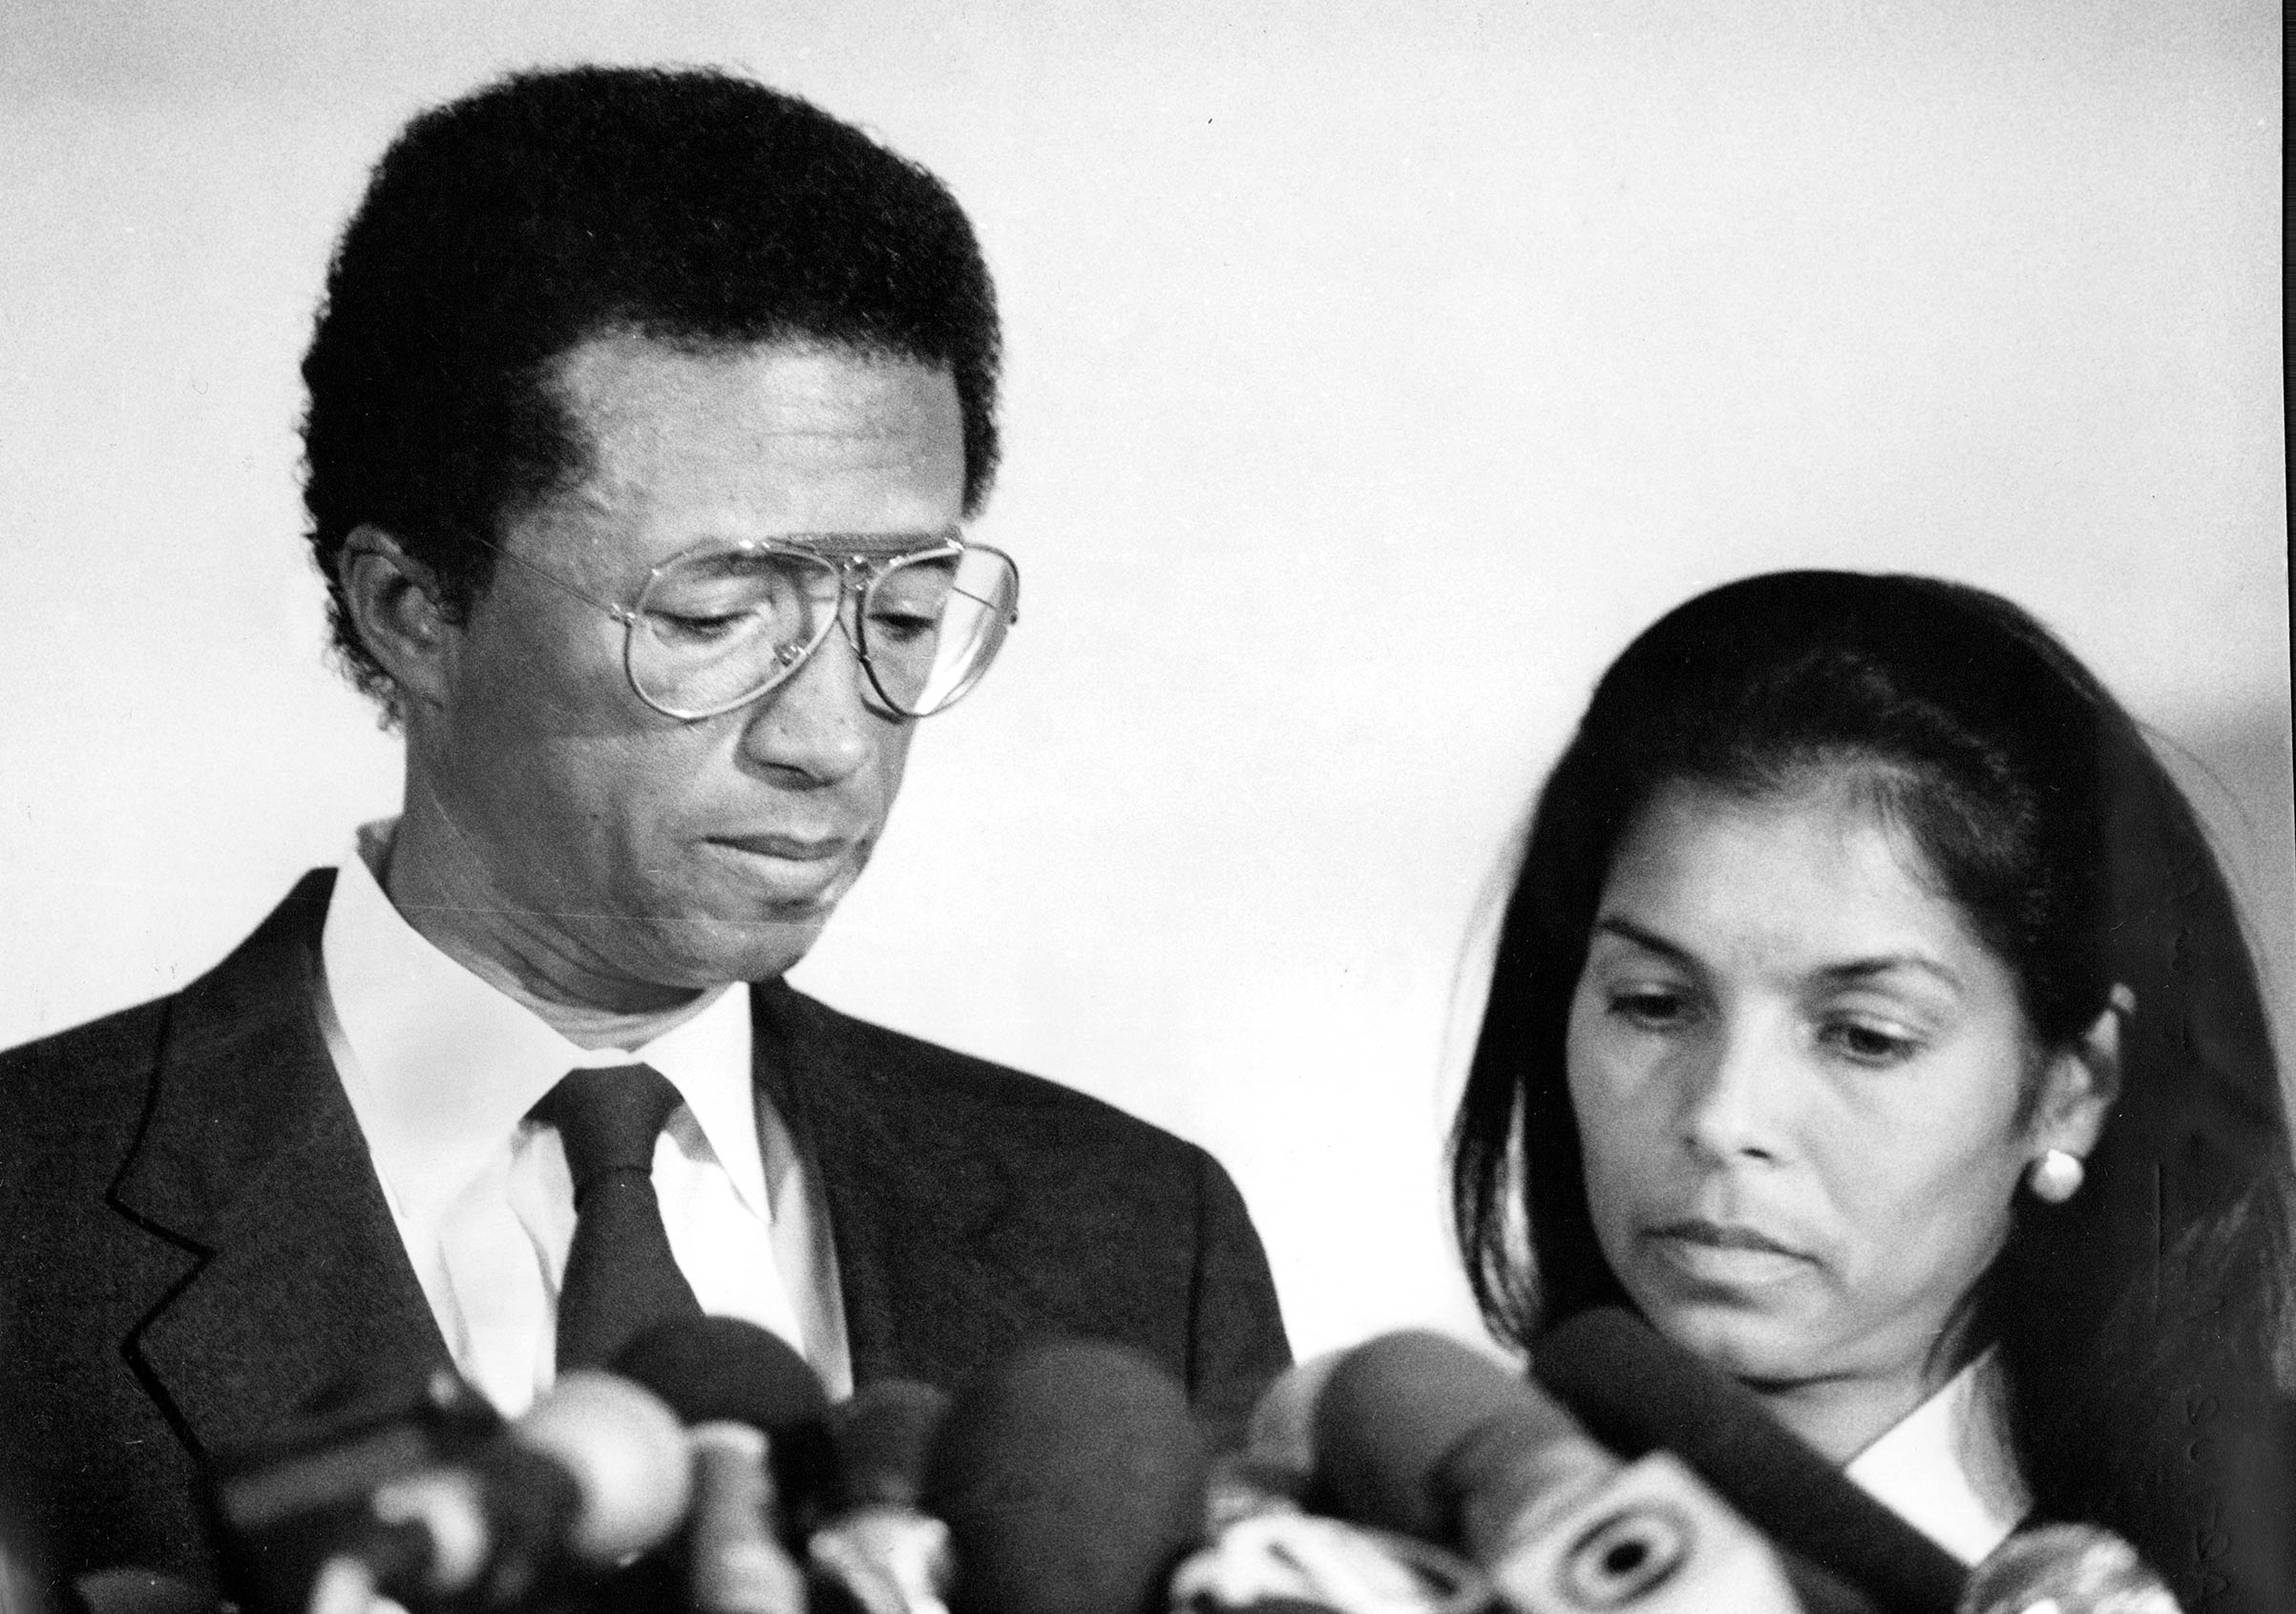 Tennis star Arthur Ashe, accompanied by wife Jeanne, announcing he contracted HIV after a blood transfusion on Apr. 8, 1992, in midtown Manhattan. (Michael Norcia/New York Post Archives—Getty Images)